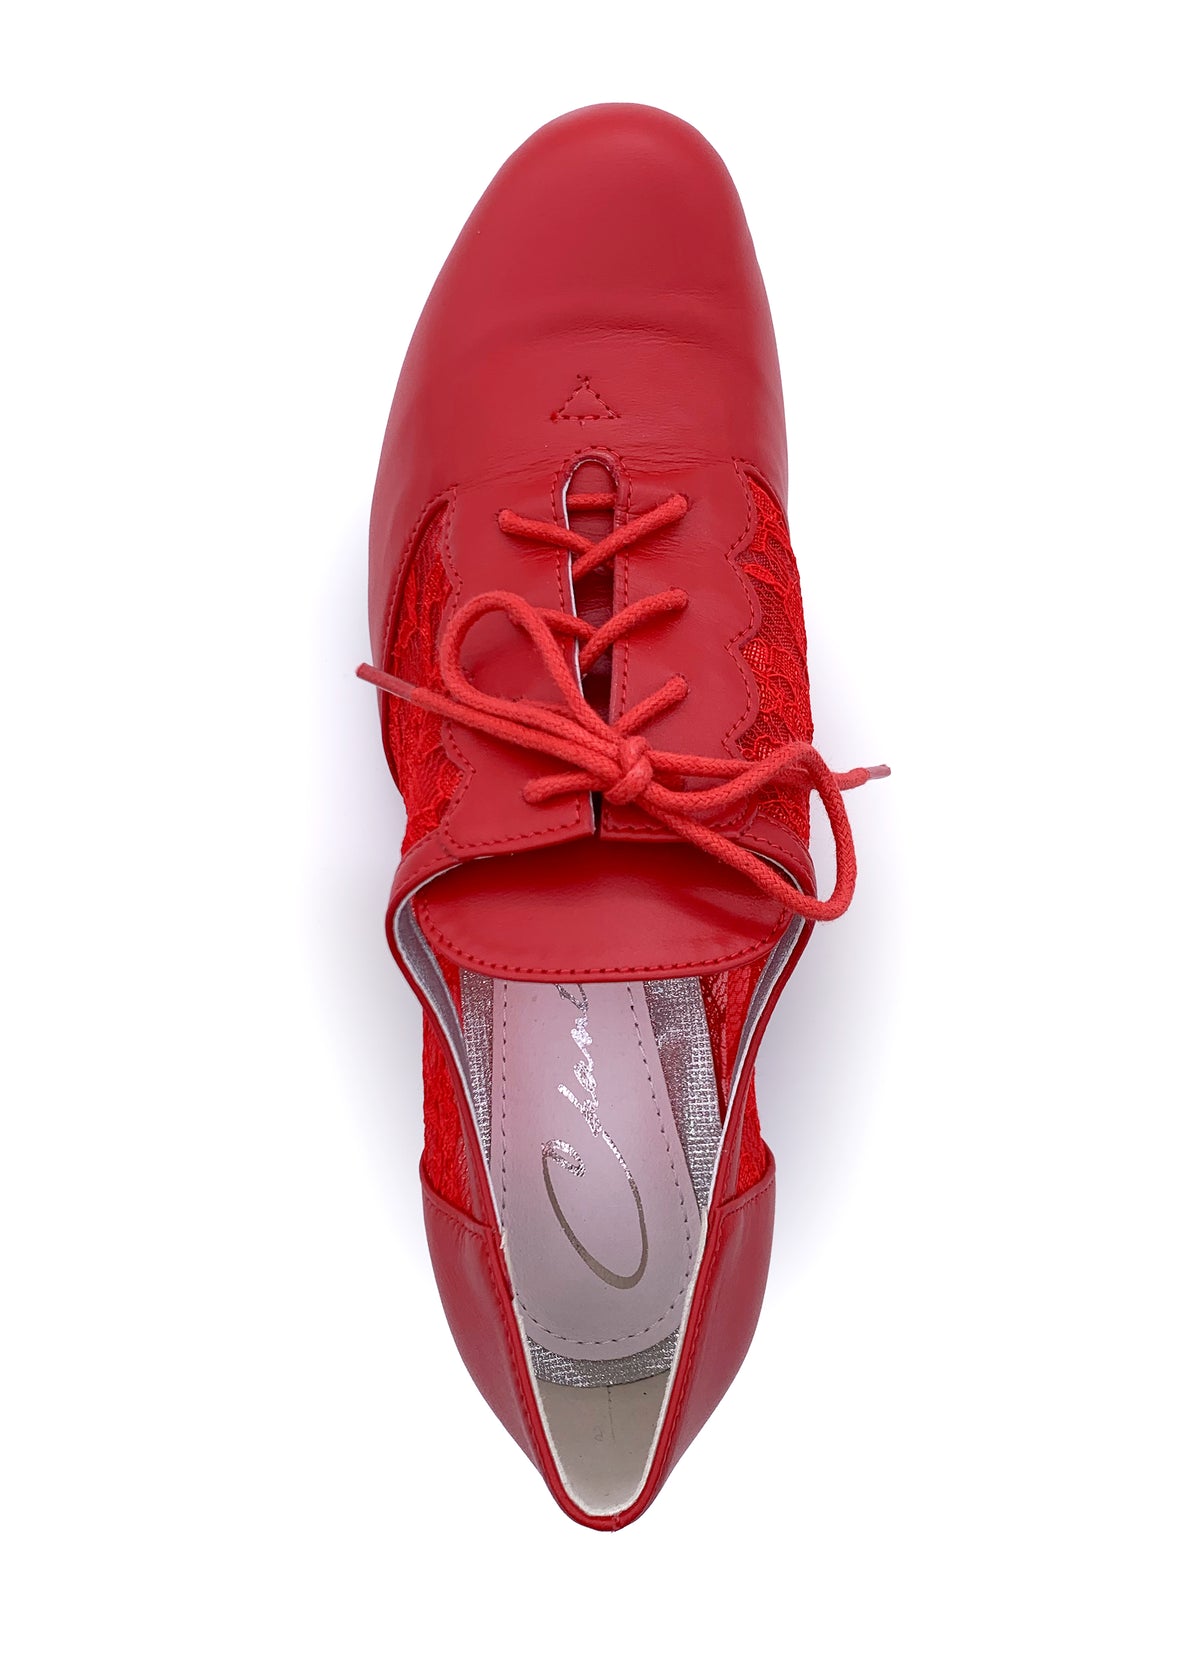 Party Walking shoes with a low heel - red leather, lace sides